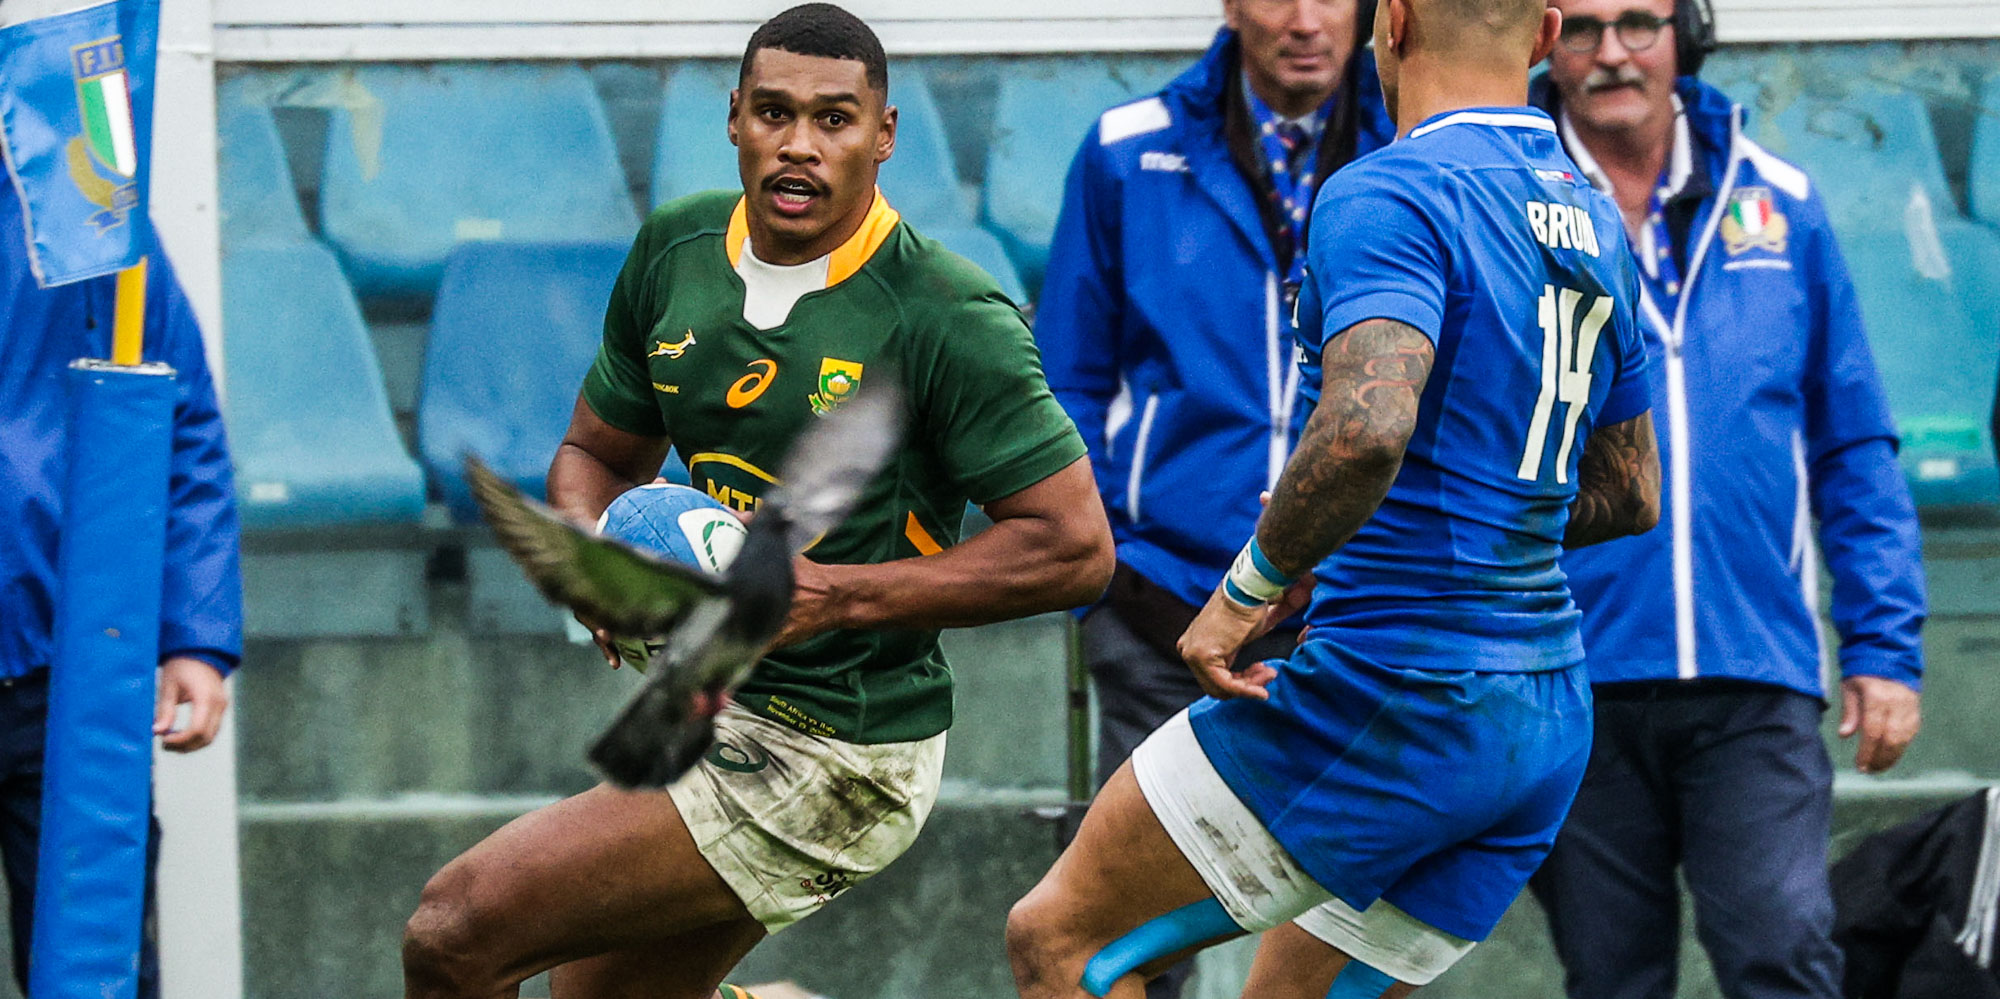 Damian Willemse springboks vs Italy - World Rugby Rankings